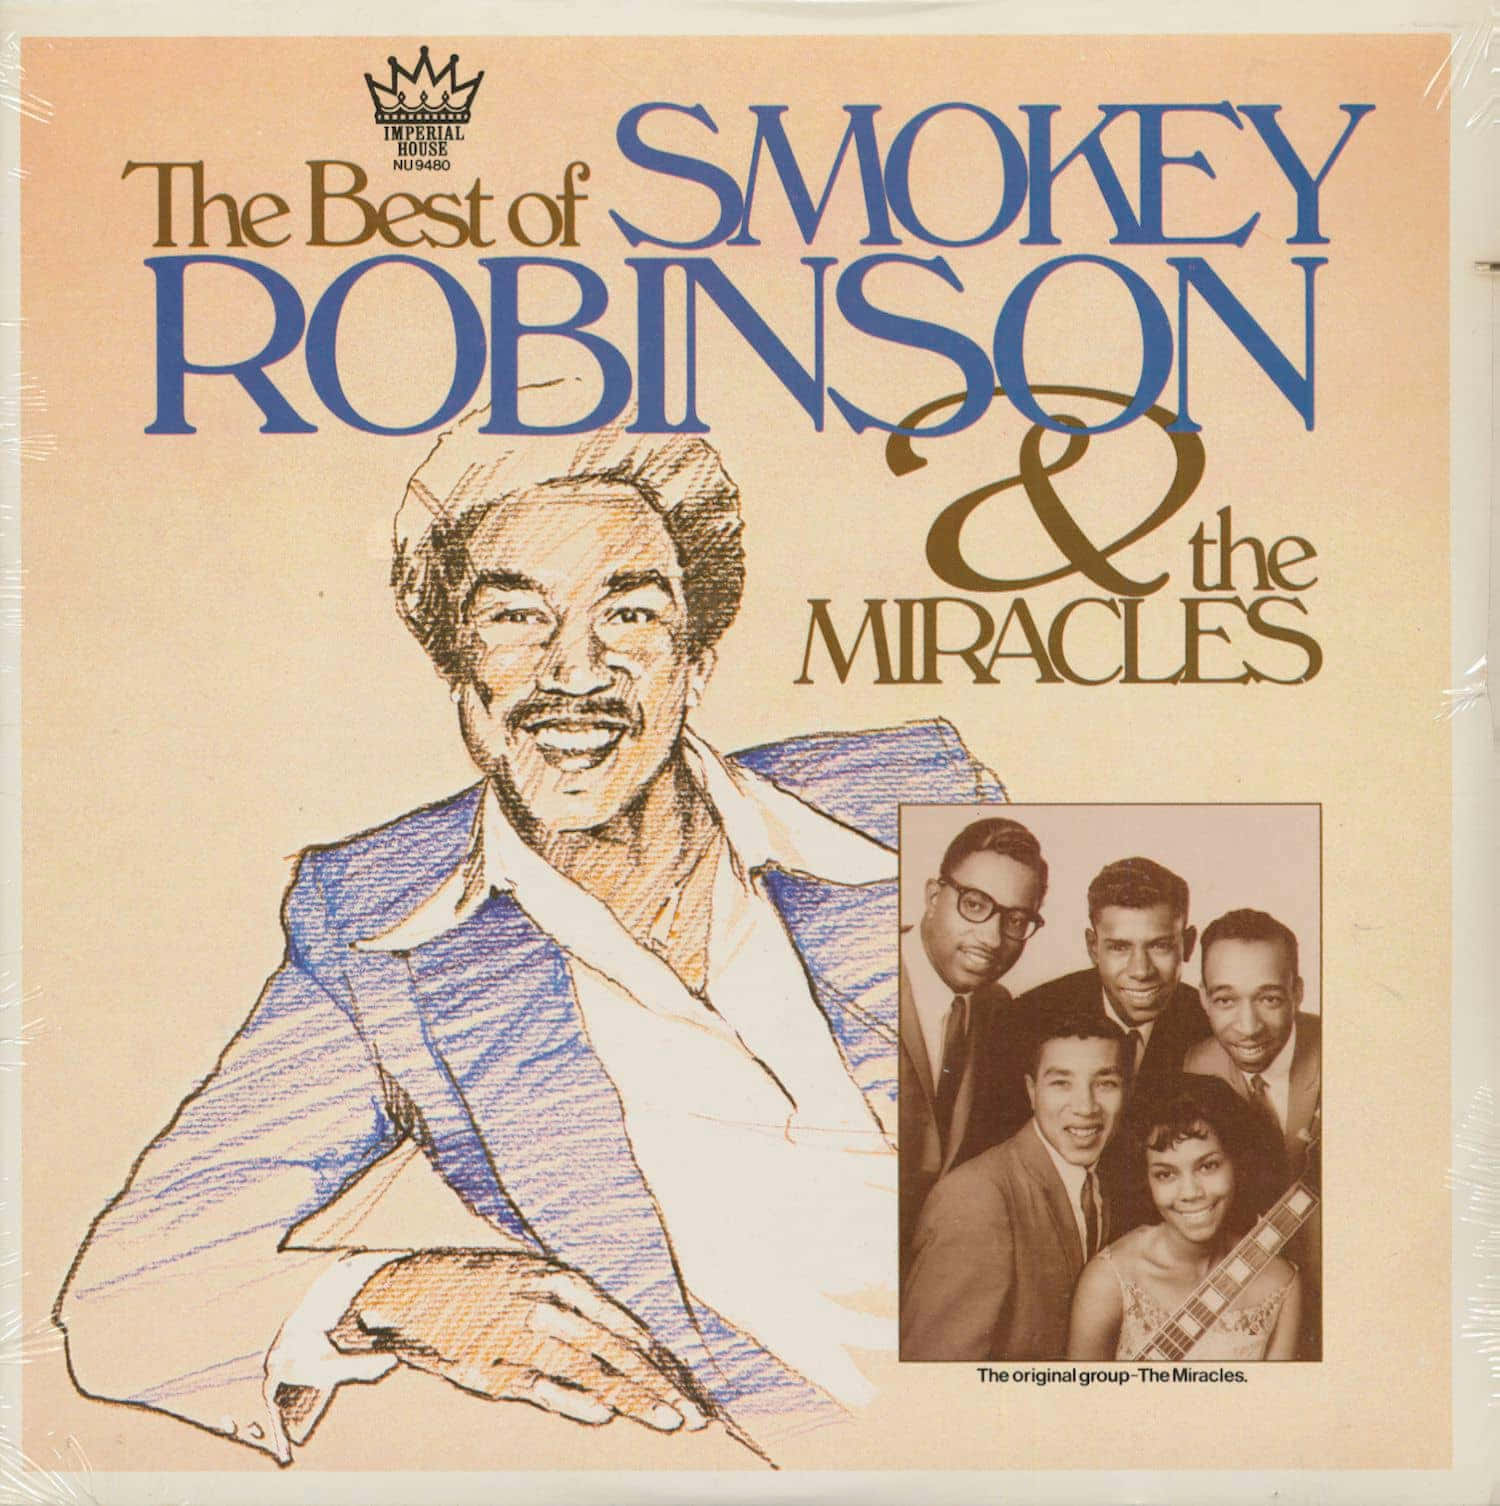 Classic Album Art of Smokey Robinson and the Miracles Wallpaper